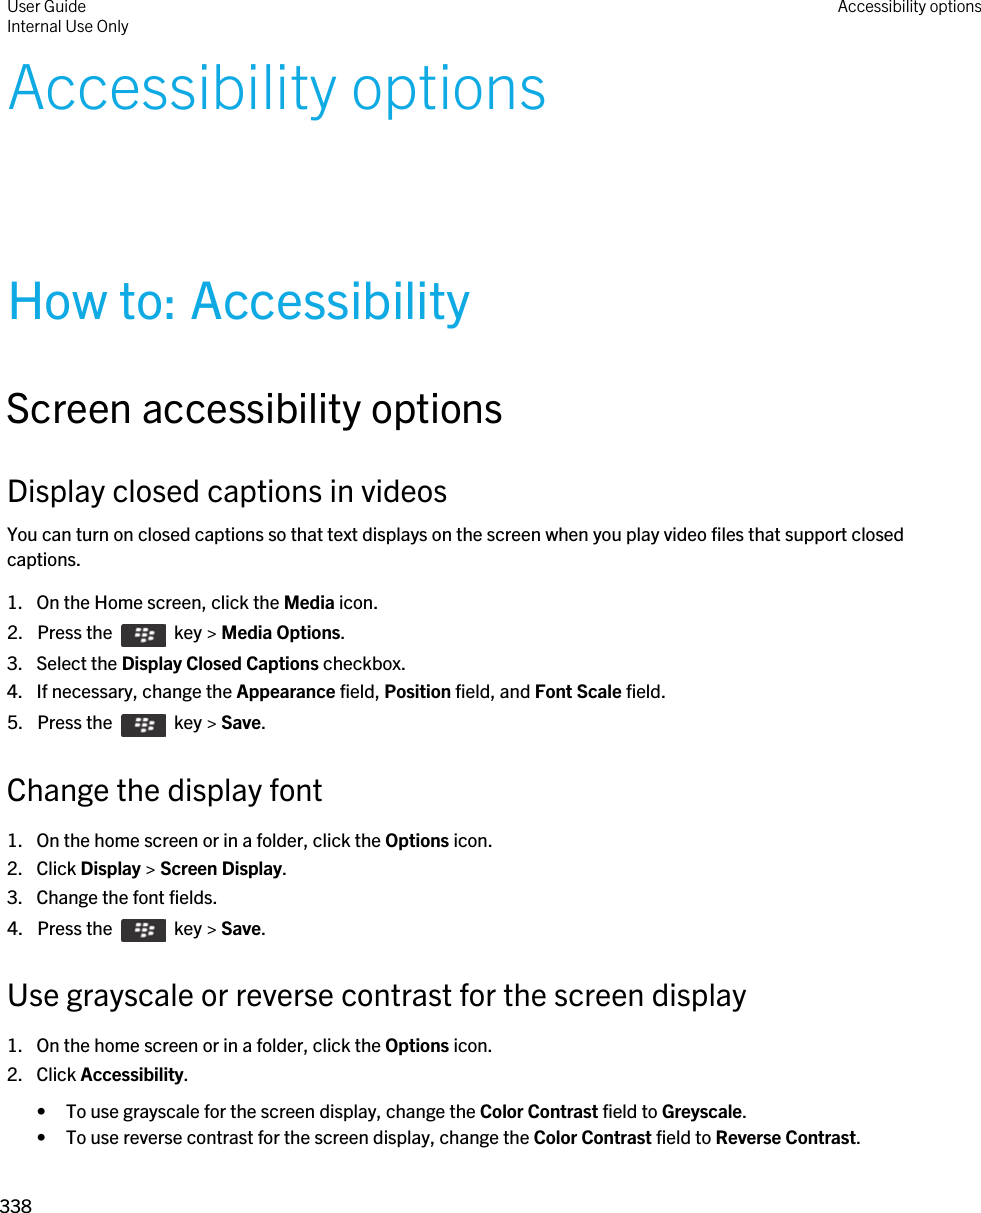 Accessibility optionsHow to: AccessibilityScreen accessibility optionsDisplay closed captions in videosYou can turn on closed captions so that text displays on the screen when you play video files that support closed captions.1. On the Home screen, click the Media icon.2.  Press the    key &gt; Media Options. 3. Select the Display Closed Captions checkbox.4. If necessary, change the Appearance field, Position field, and Font Scale field.5.  Press the    key &gt; Save. Change the display font1. On the home screen or in a folder, click the Options icon.2. Click Display &gt; Screen Display.3. Change the font fields.4.  Press the    key &gt; Save. Use grayscale or reverse contrast for the screen display1. On the home screen or in a folder, click the Options icon.2. Click Accessibility.• To use grayscale for the screen display, change the Color Contrast field to Greyscale.• To use reverse contrast for the screen display, change the Color Contrast field to Reverse Contrast.User GuideInternal Use Only Accessibility options338 